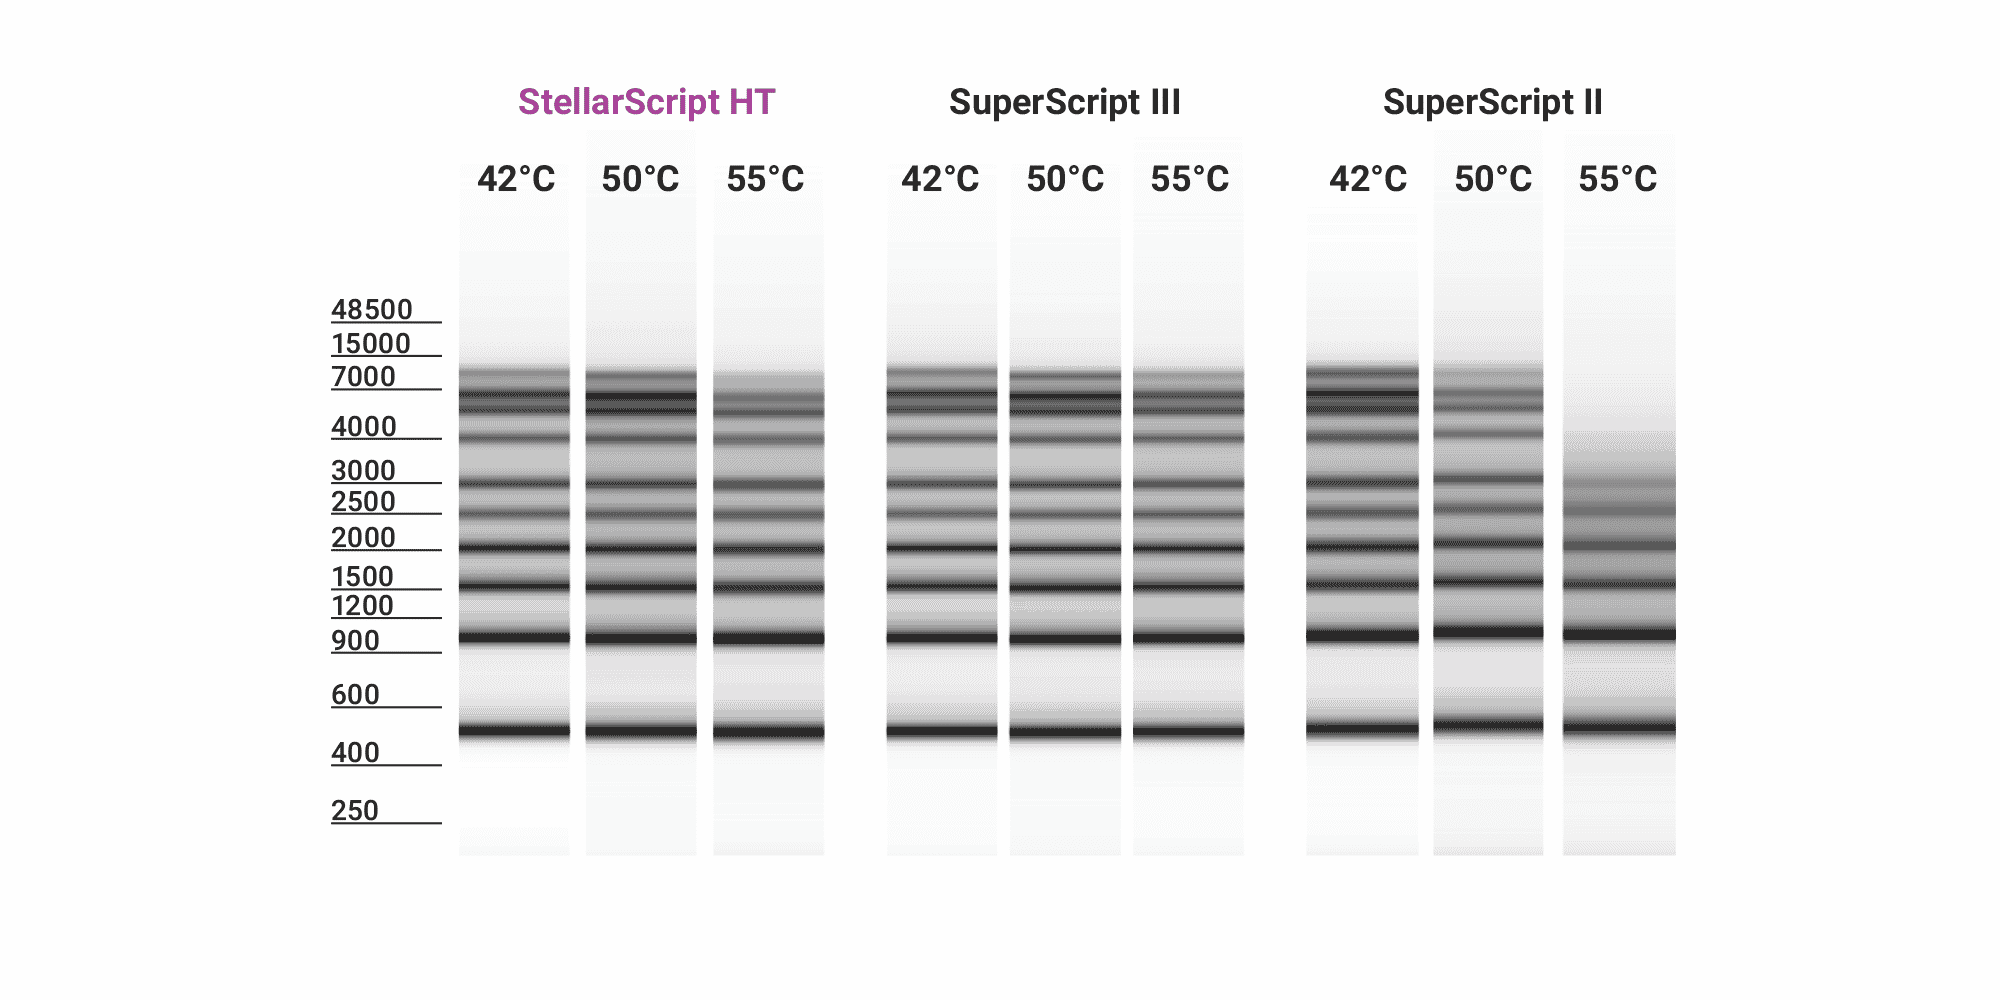 Figure 1B. Improved performance at elevated temperatures. Watchmaker’s StellarScript HT and ThermoFisher Scientific’s SuperScript III were run in oligo-dT-primed first strand synthesis at 42°C, 50°C or 55°C for 30 minutes using a 0.5 to 9 kb RNA ladder as template. Both enzymes have robust processivity across the temperatures assessed.